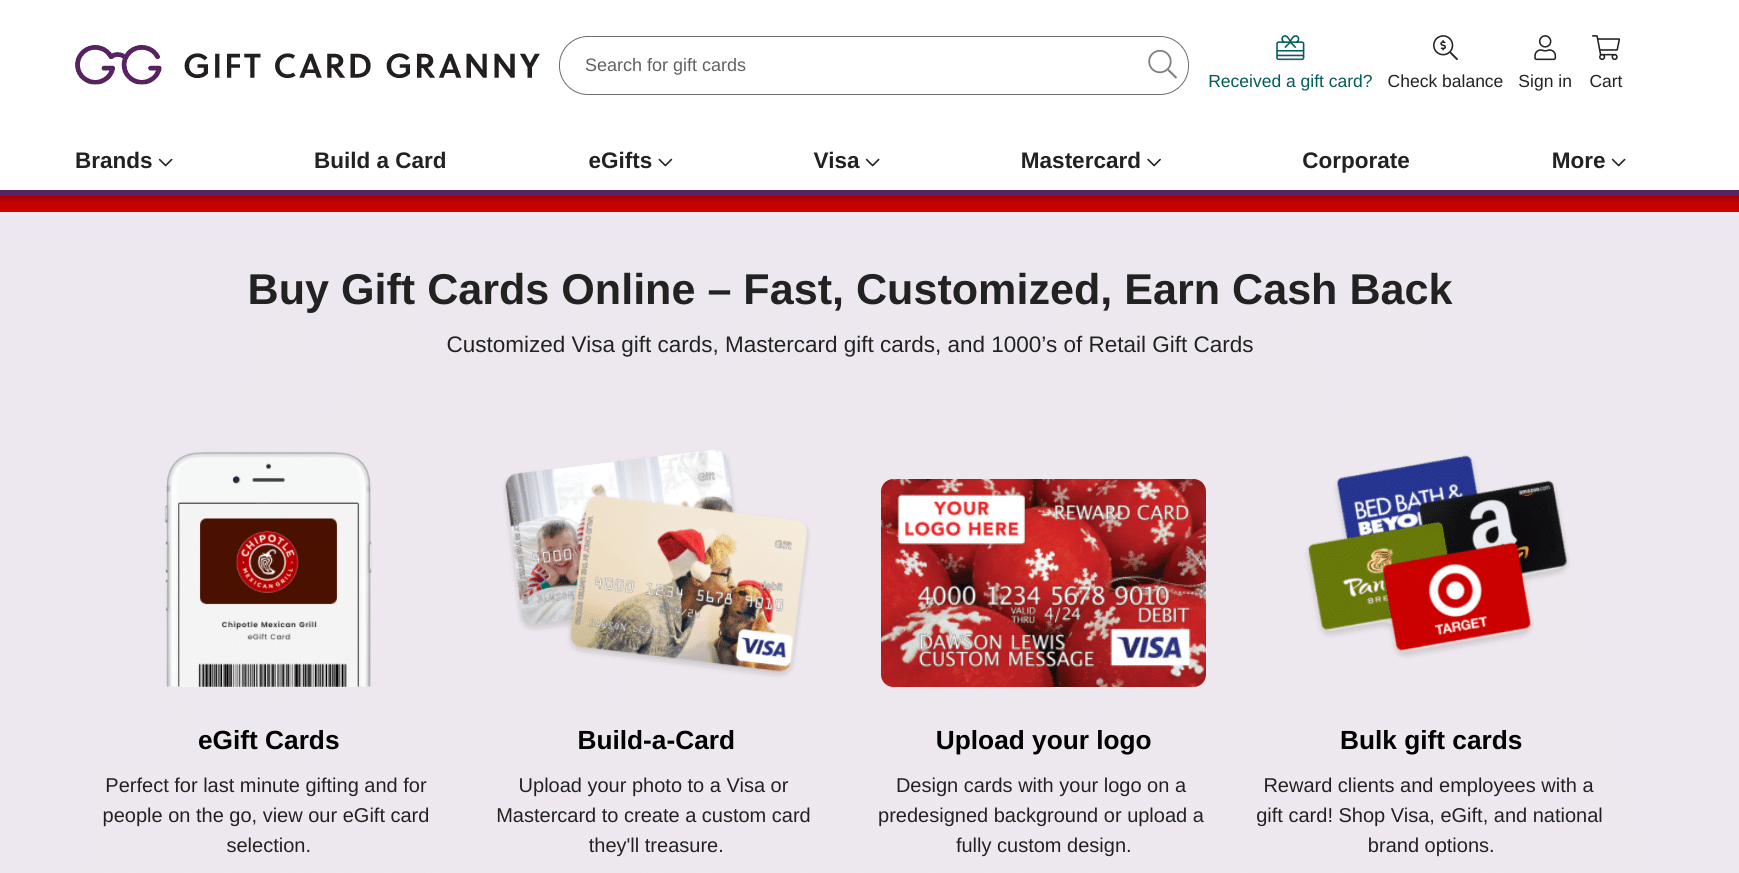 discounted gift cards: Gift Card Granny